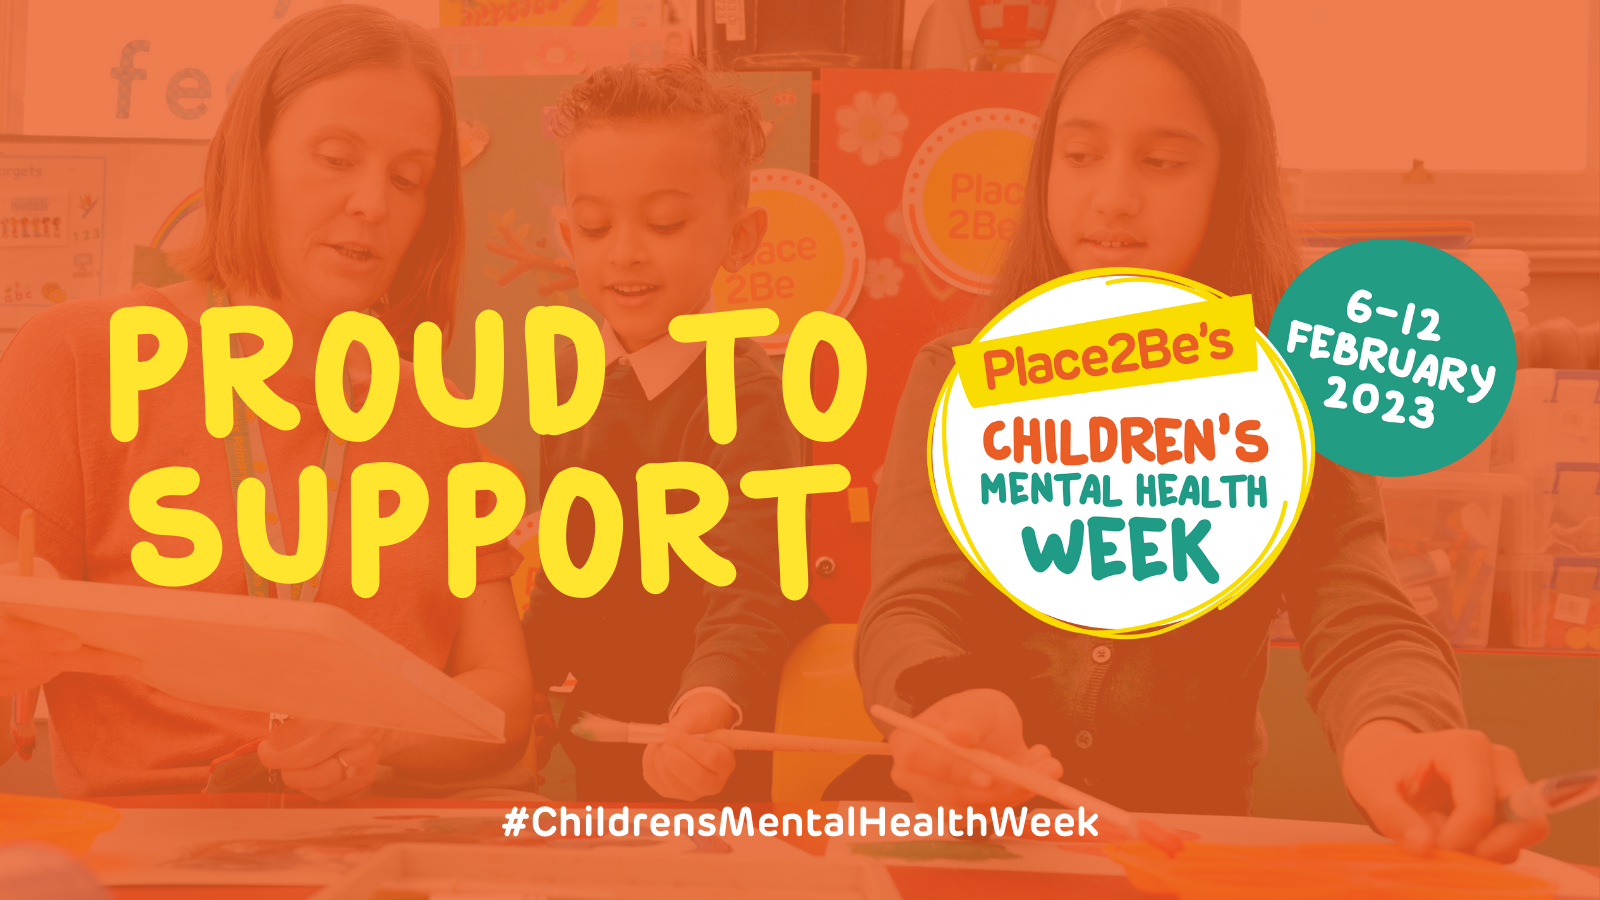 Let’s Connect for Children’s Mental Health Week